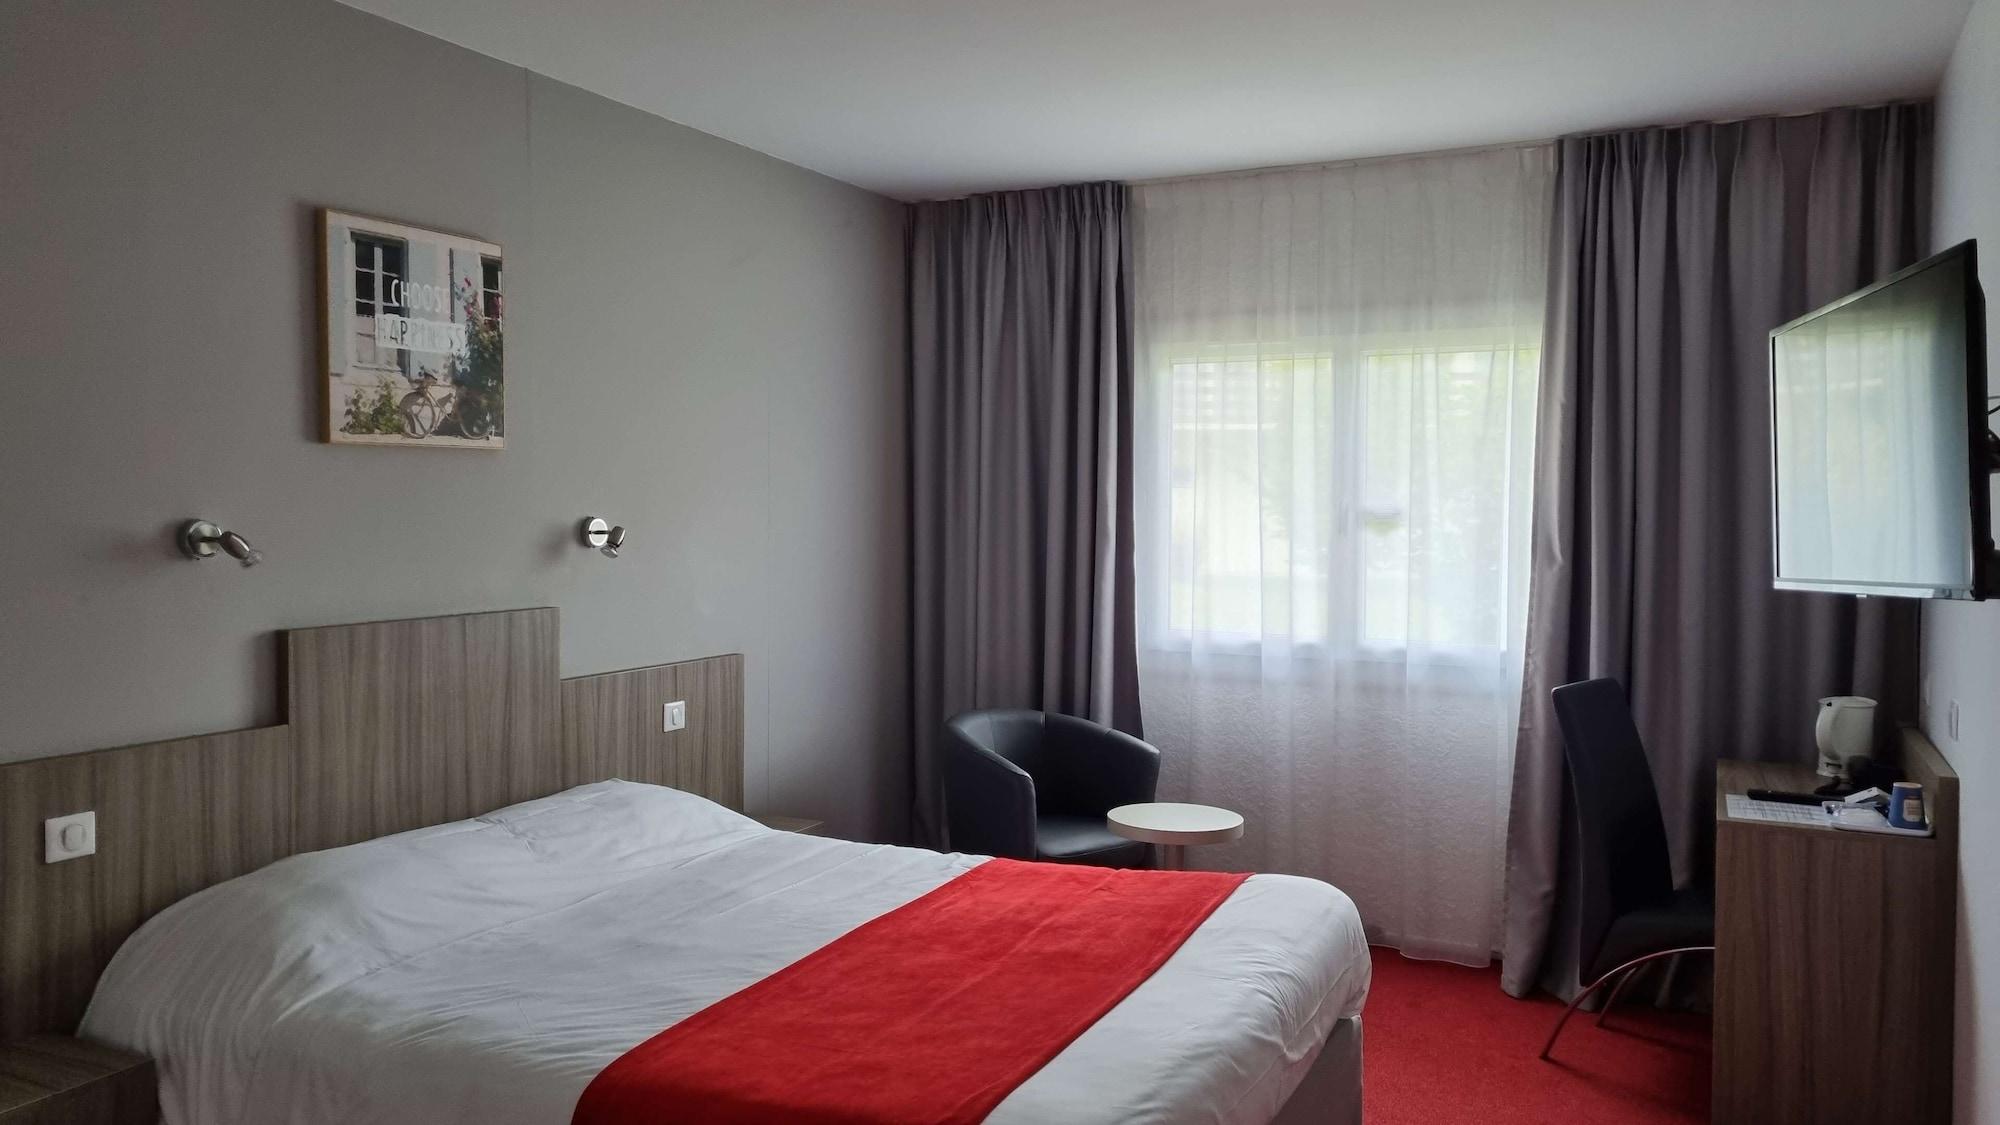 Kyriad Angouleme Nord Champniers- Hotel & Residence Champniers  Buitenkant foto